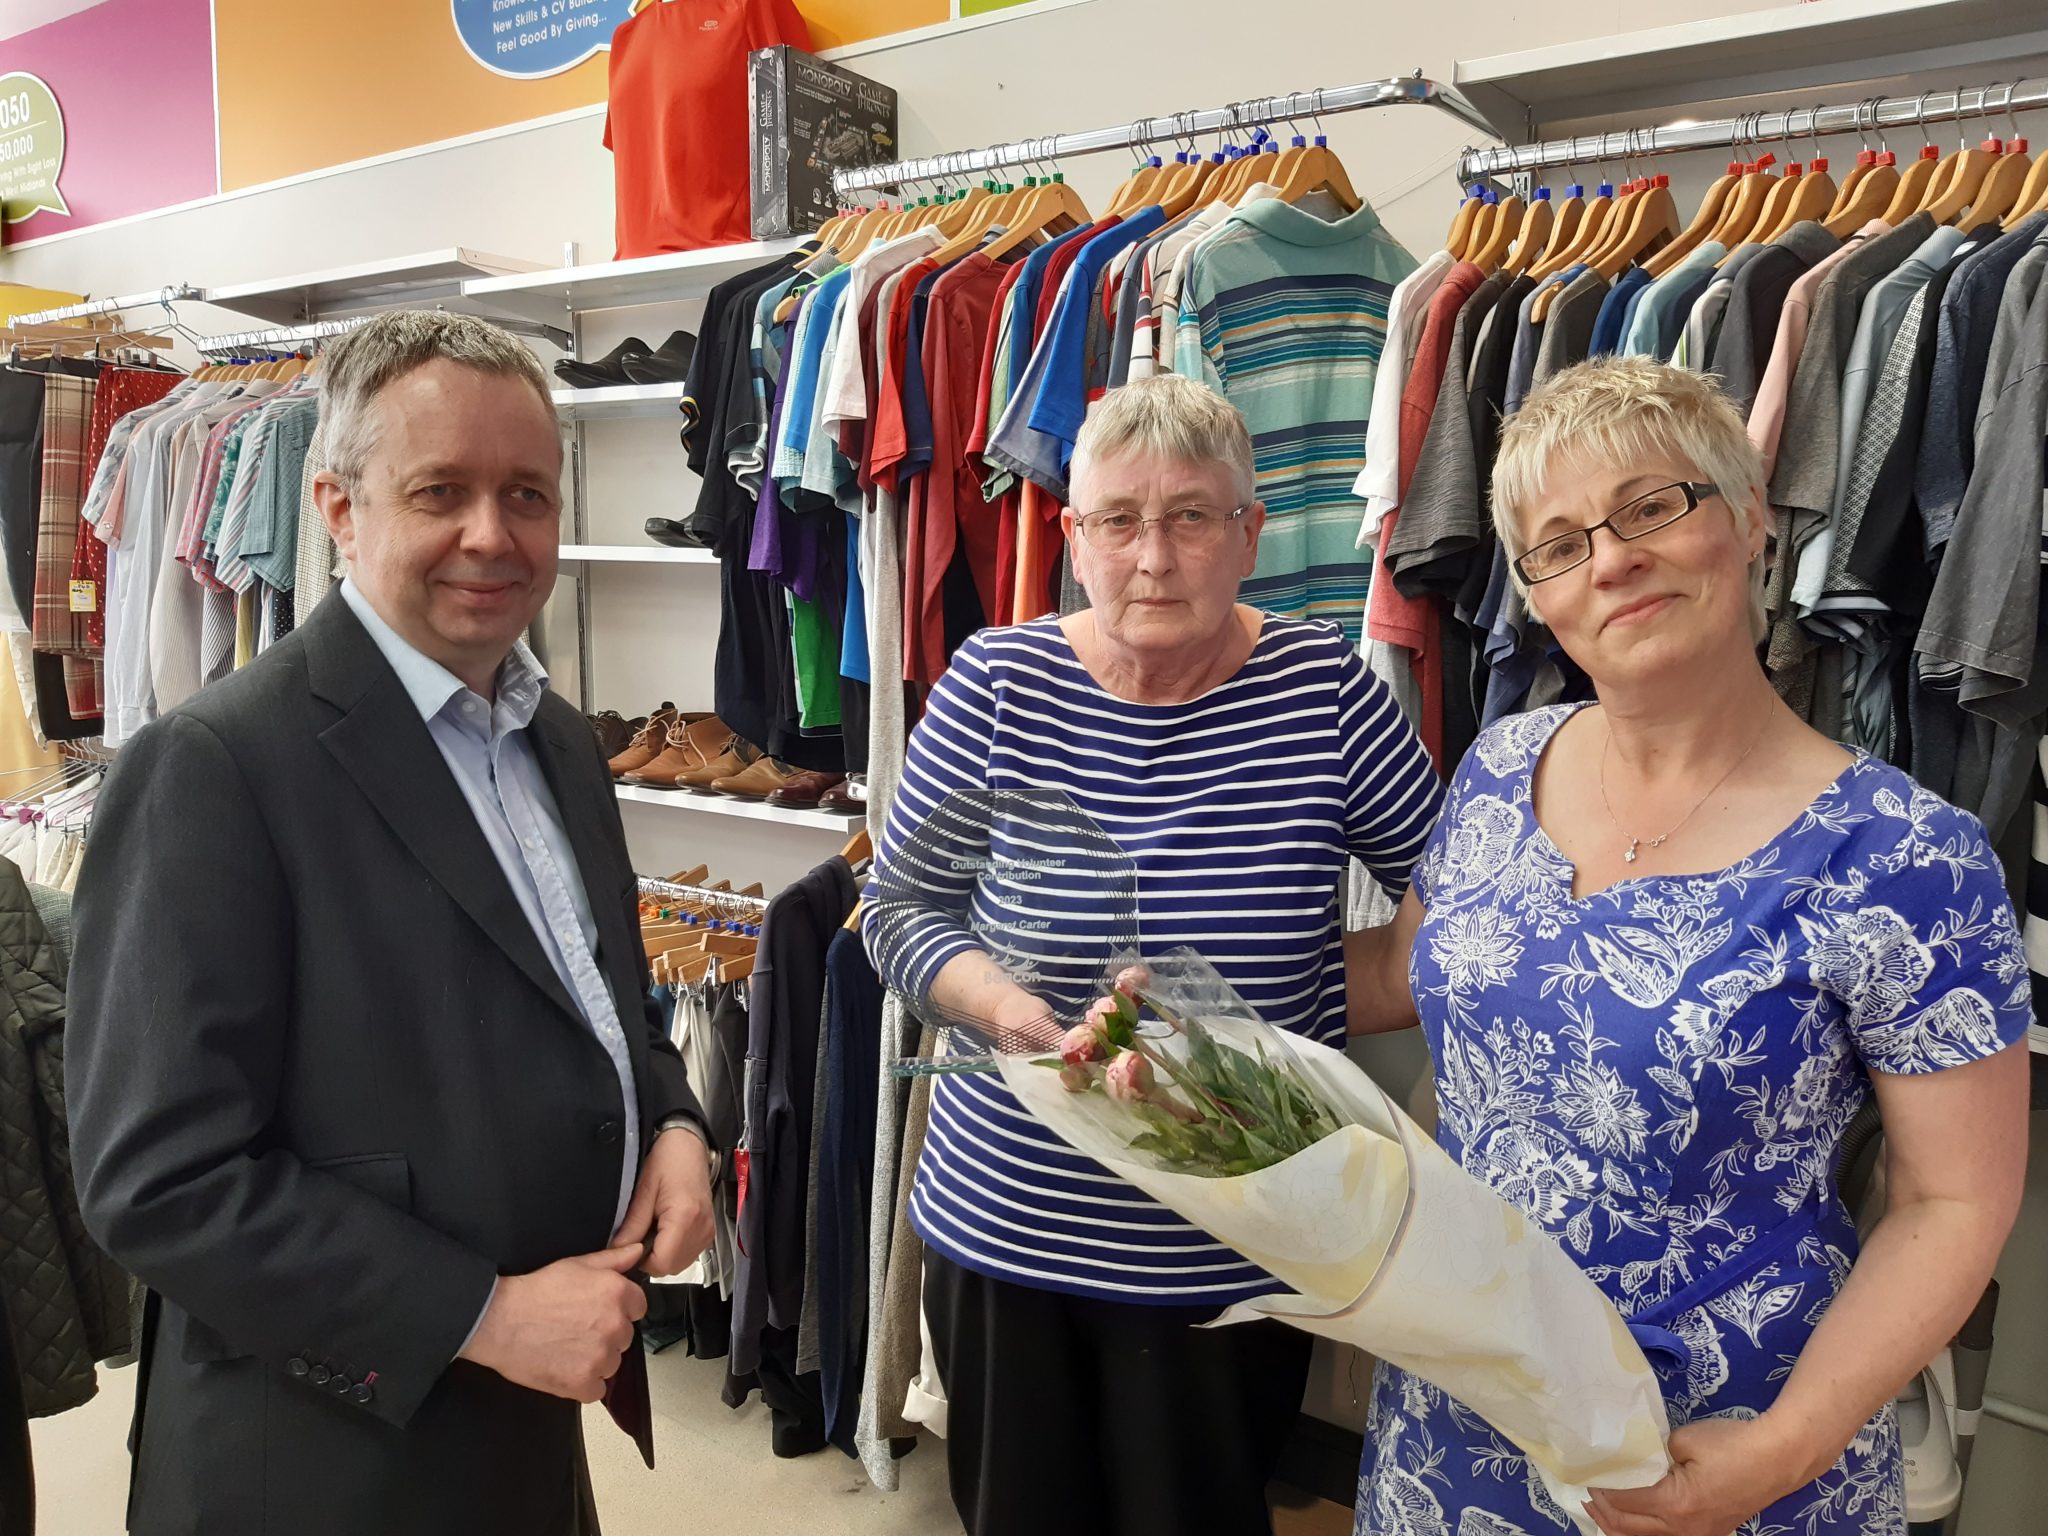 This shows our Corporate Services Director Philip Mills on the left, Nicola Bench, Halesowen assistant shop manager on the right and Margaret, with her award in the middle.